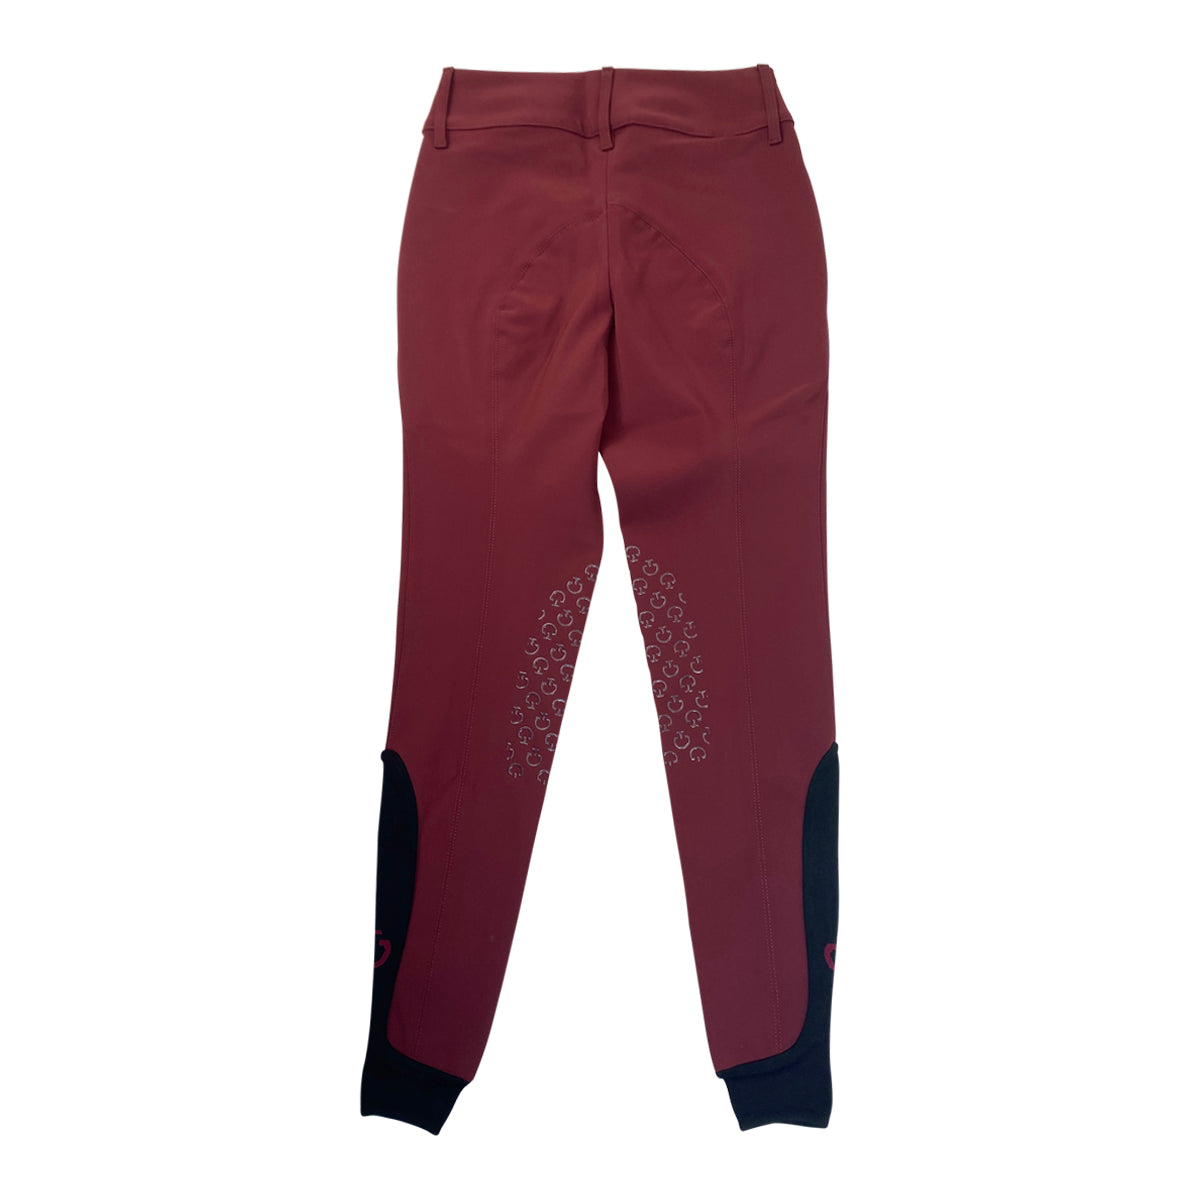 Cavalleria Toscana 'American' High Rise Jumping Breeches in Bordeaux 